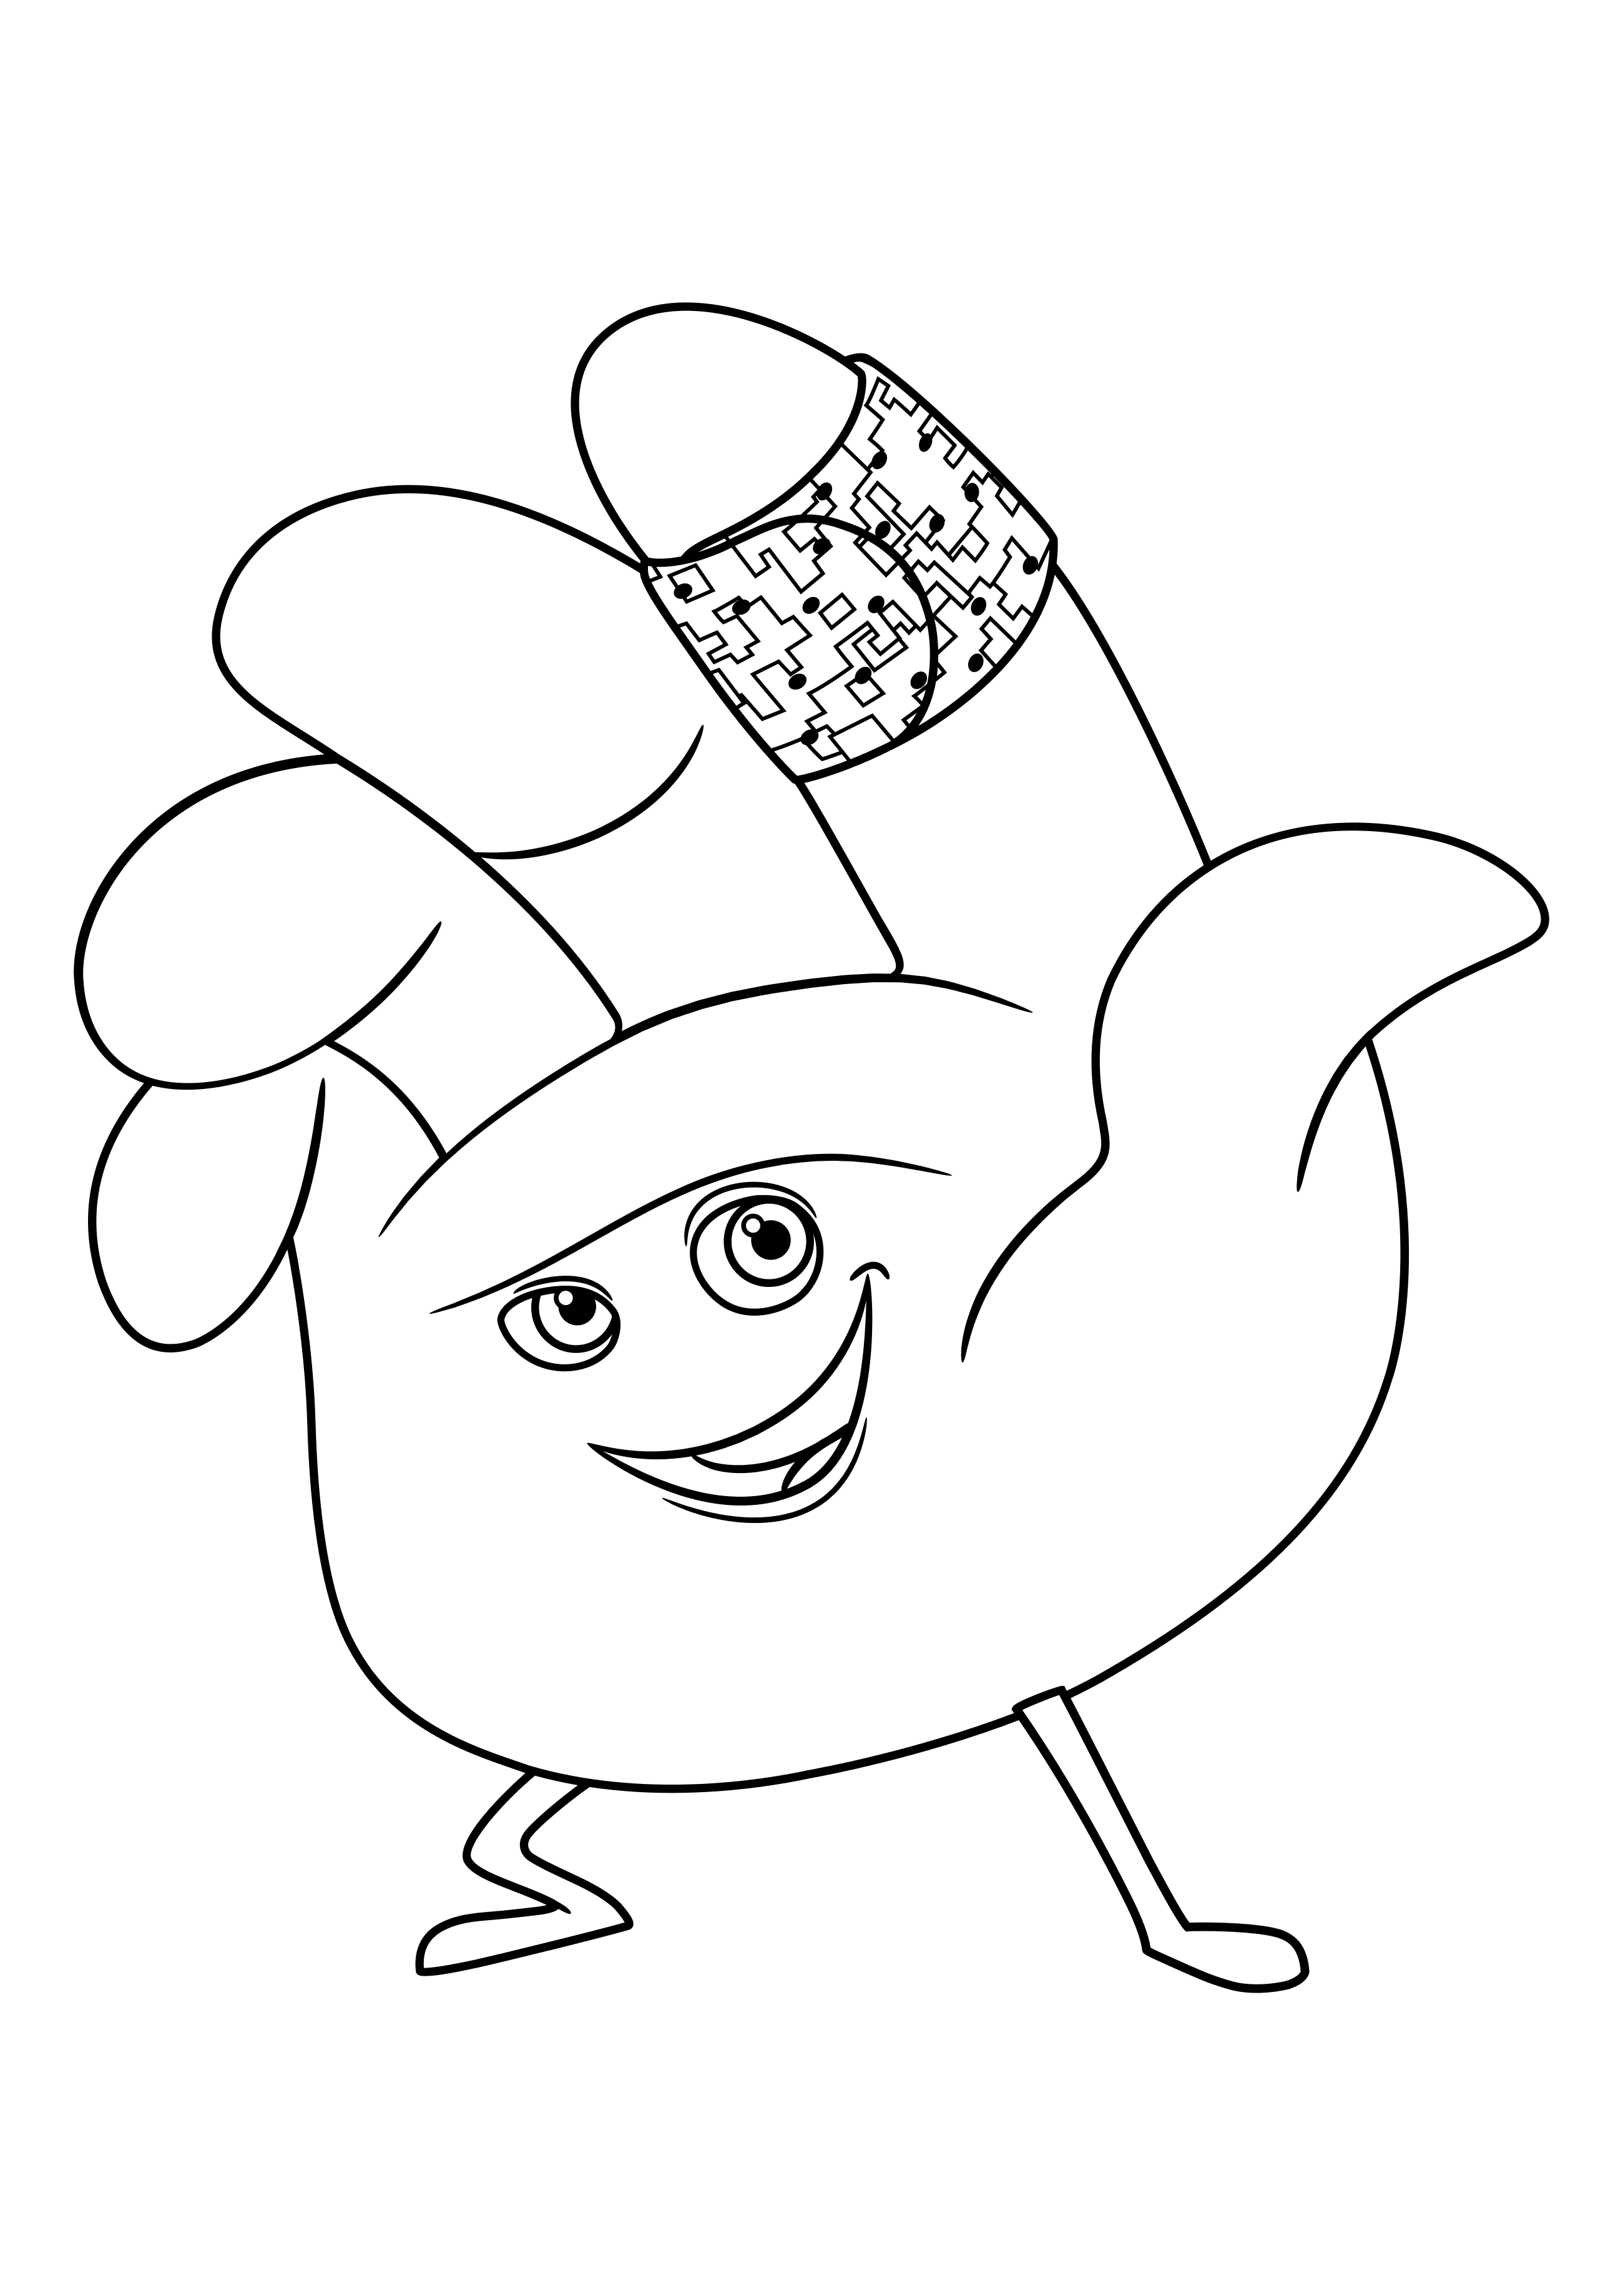 minion movie coloring pages